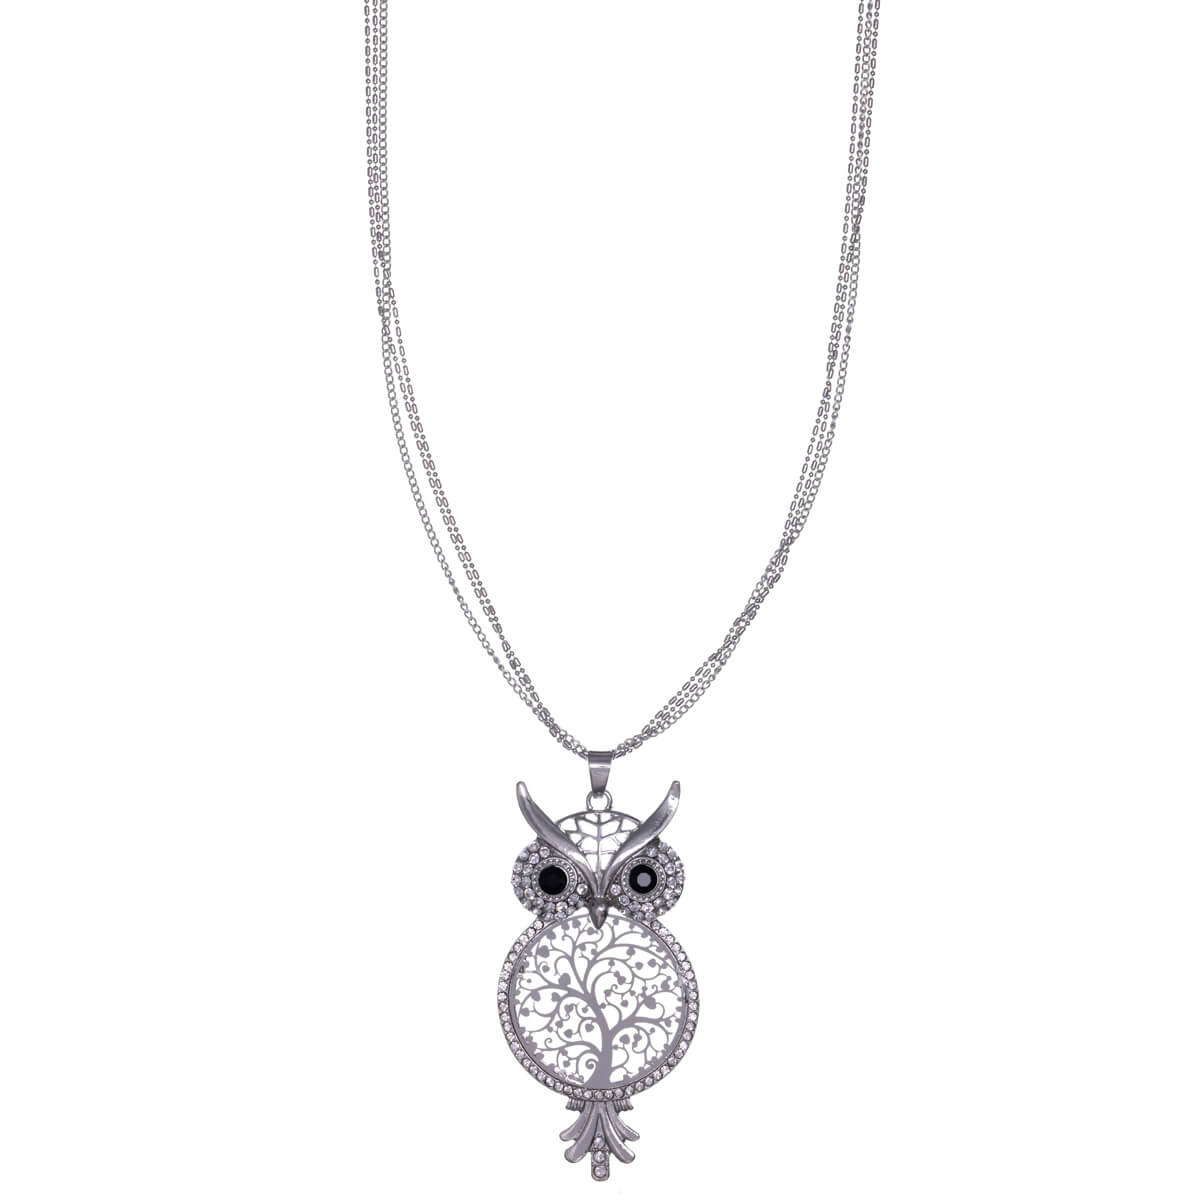 Owl necklace with three chains 70cm